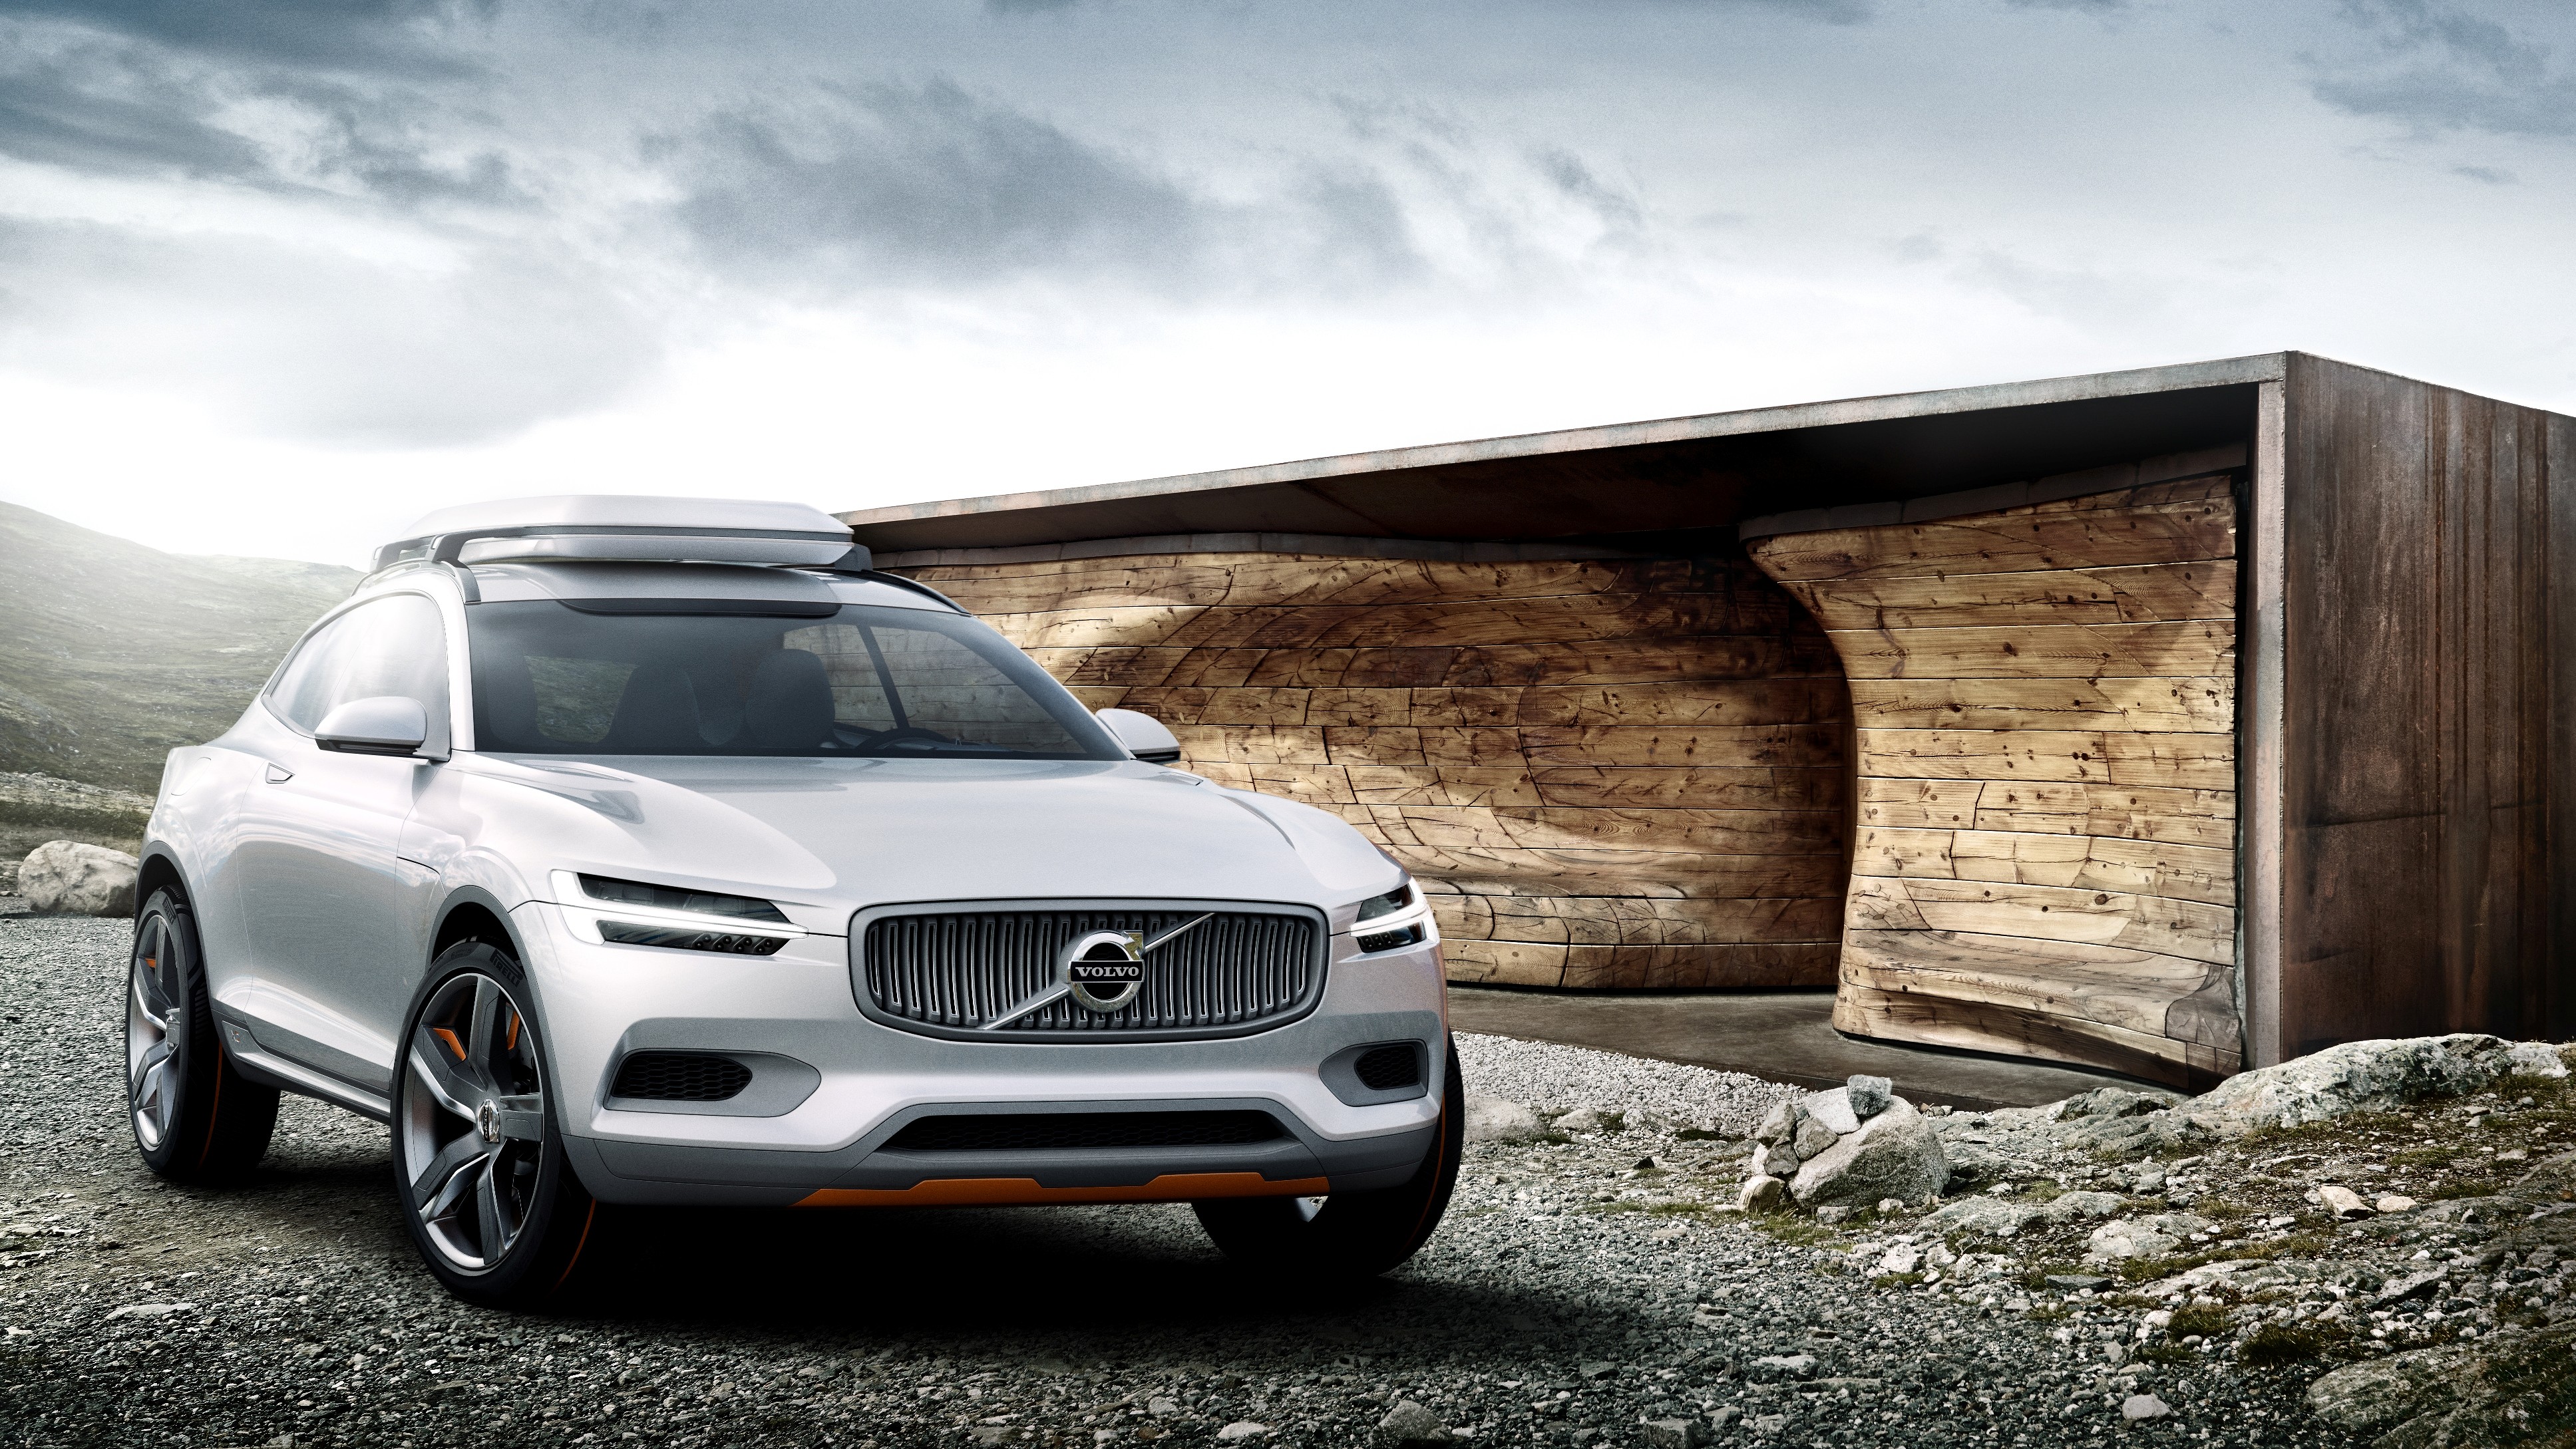 Volvo XC coupe design is ‘inspired by adventure sports gear’